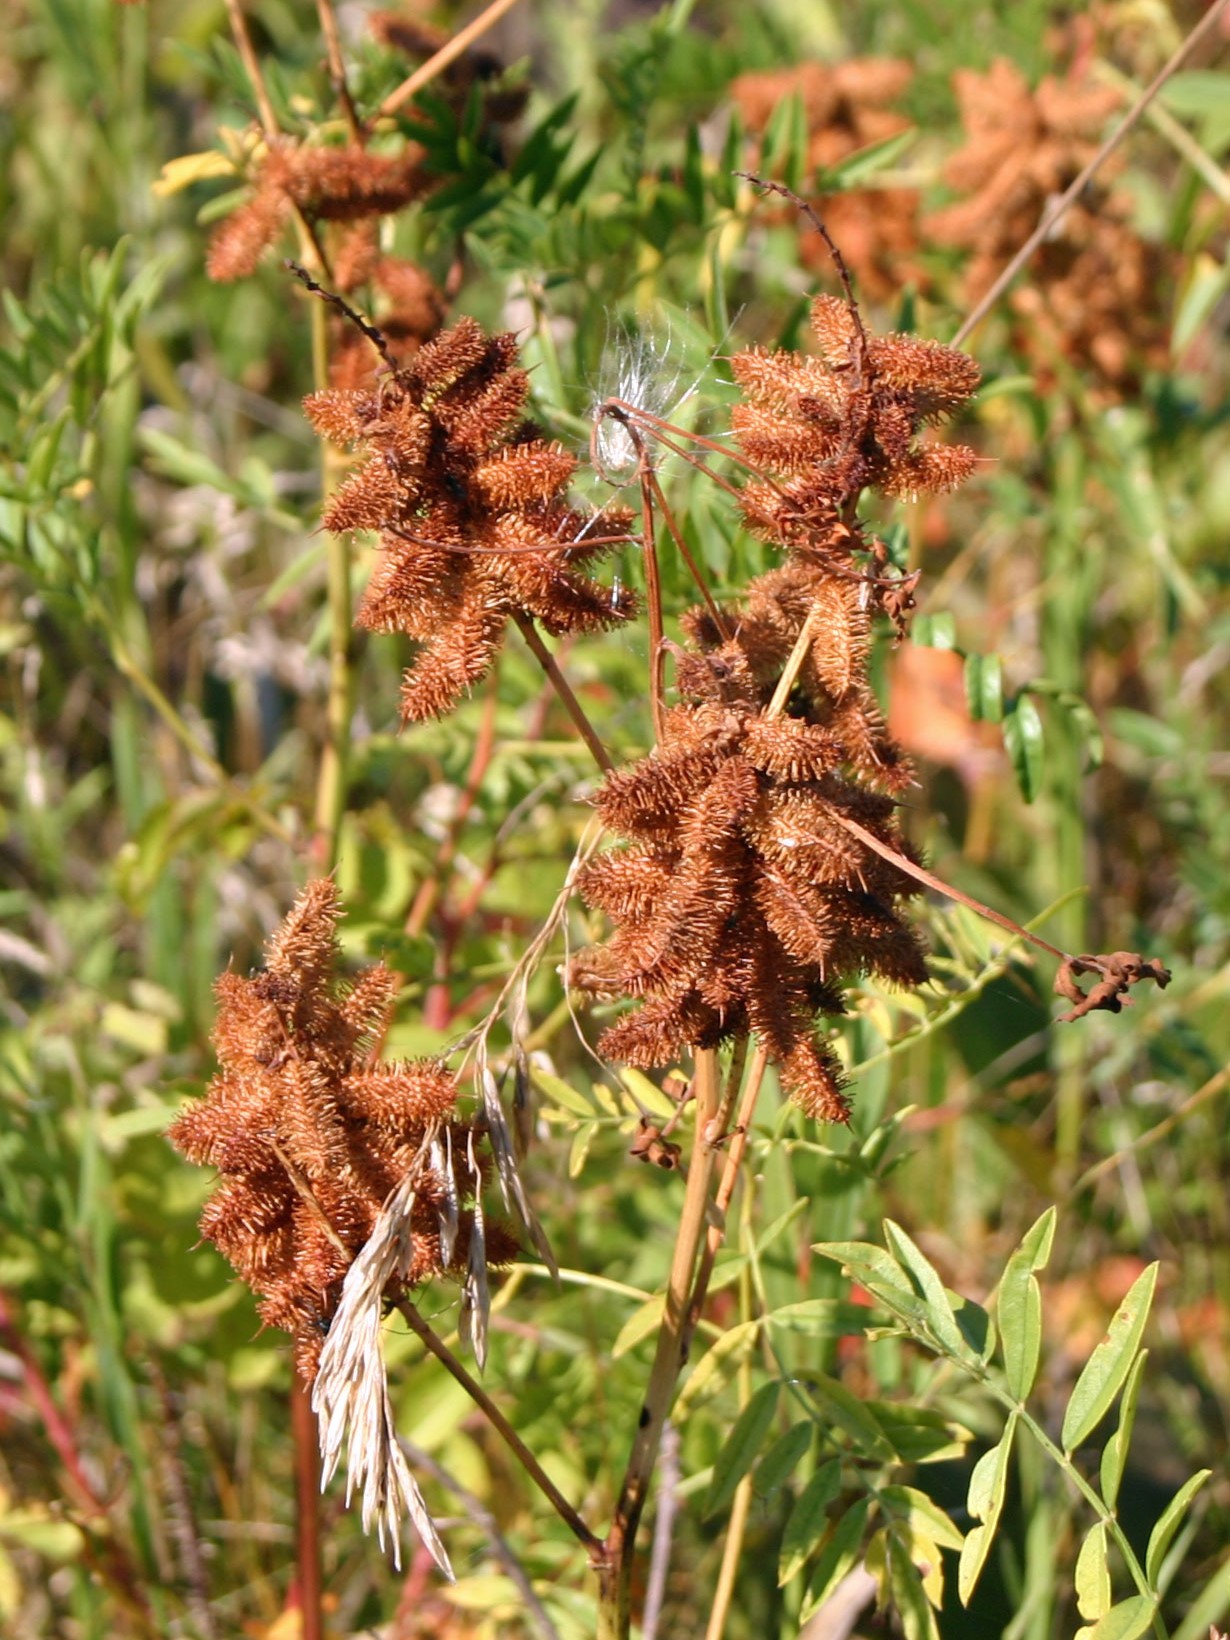 Bristley brown seed pods on branches emerging from grassy ground.